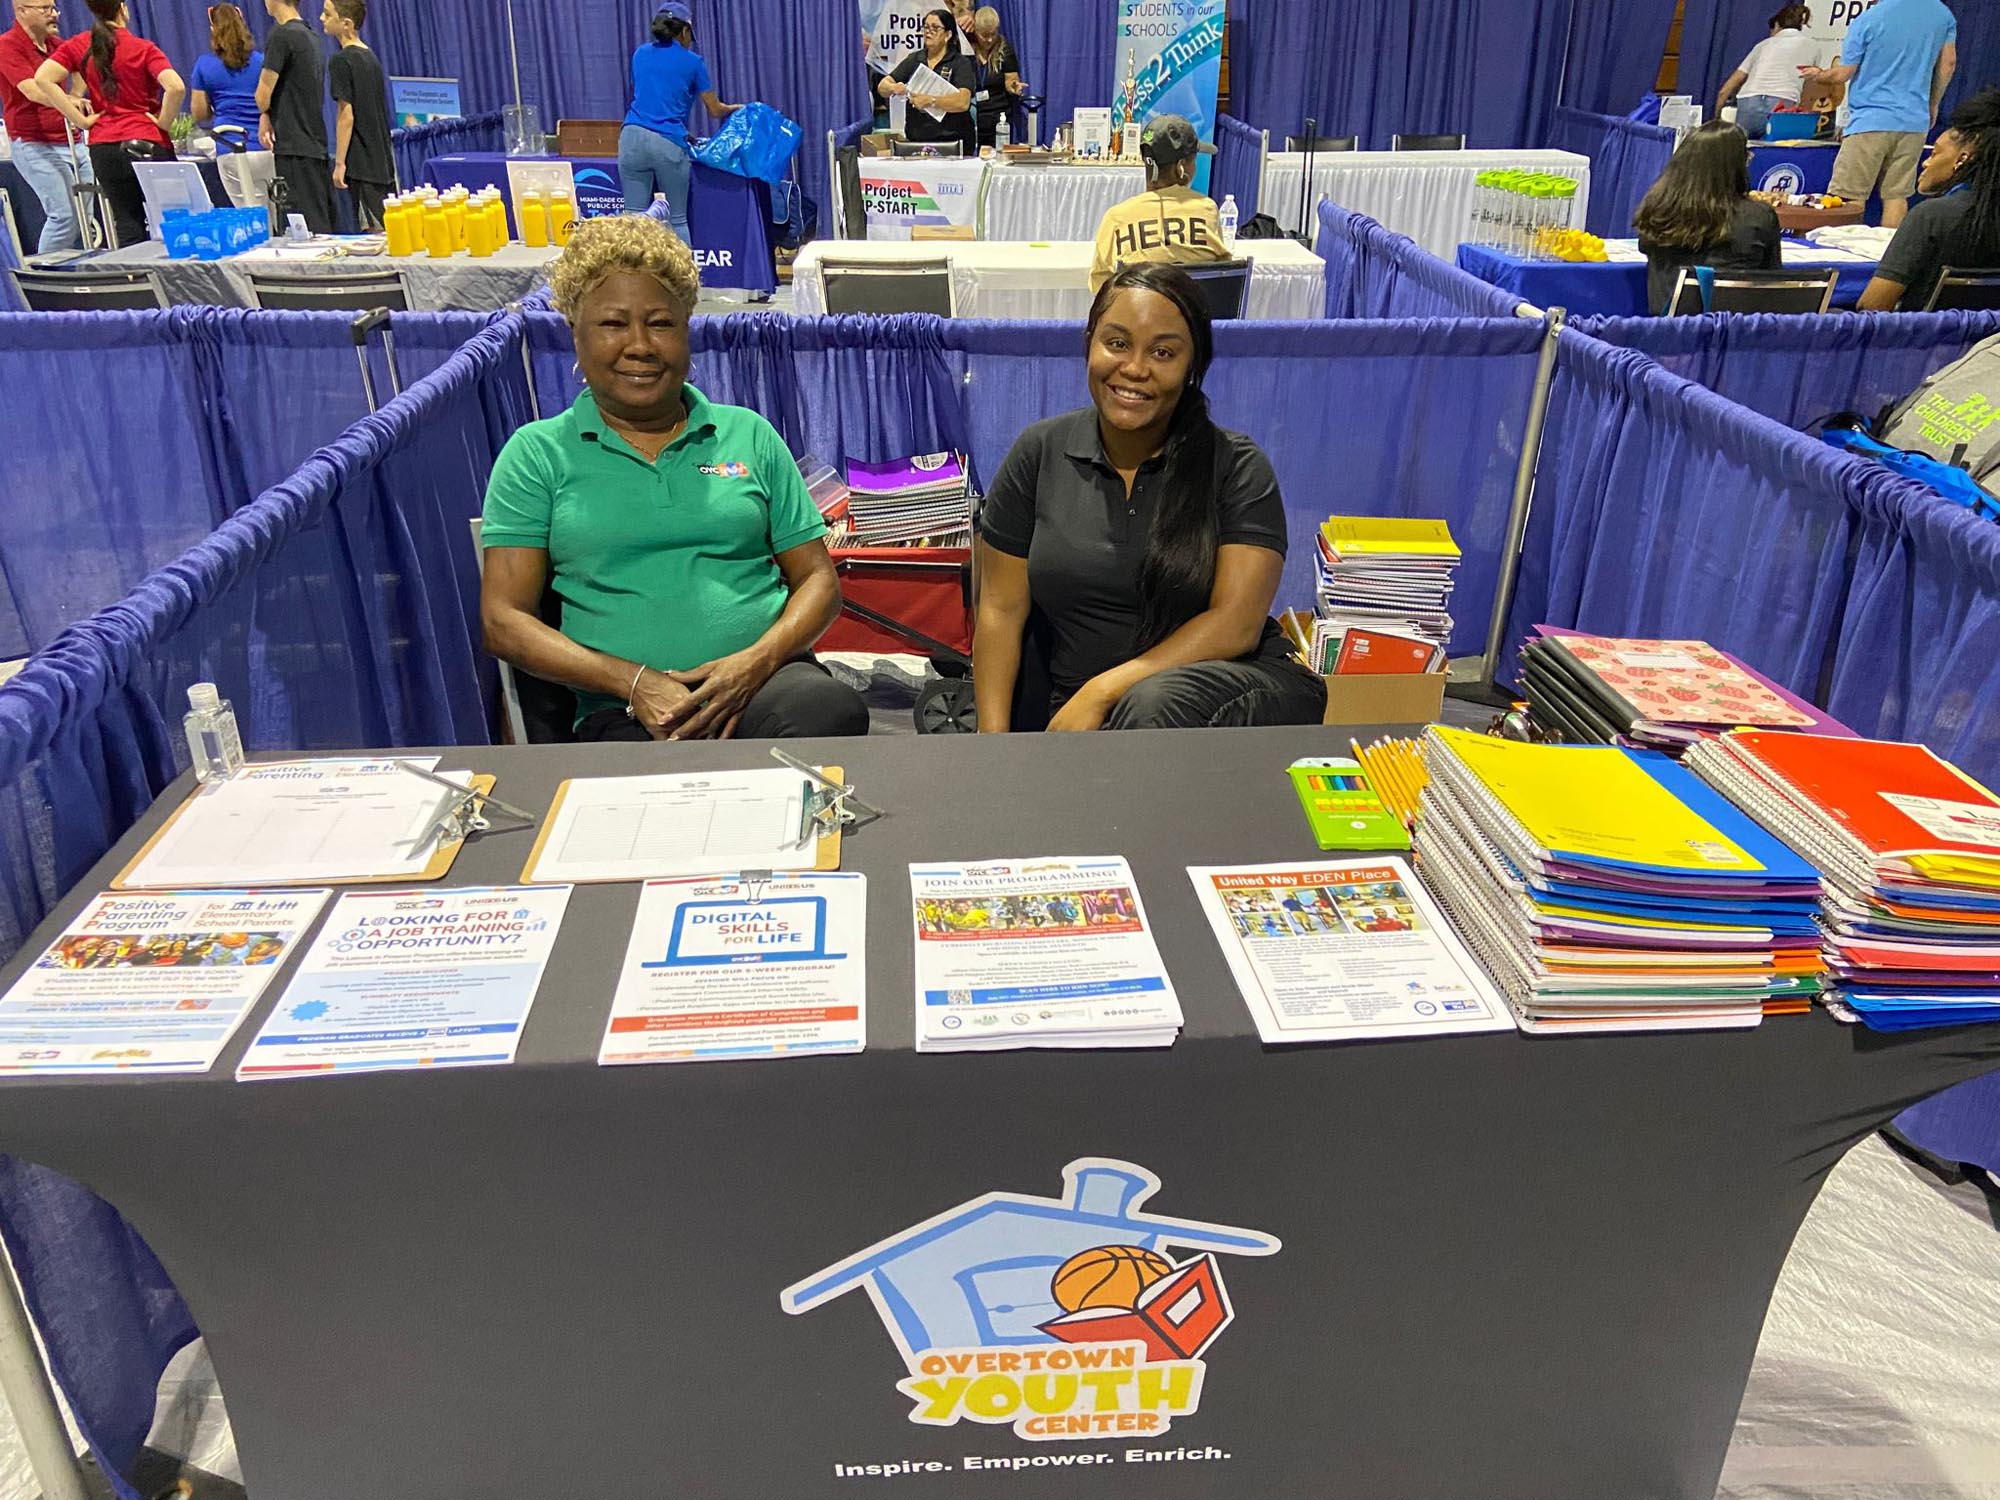 A booth at the Children's Trust Family Expo